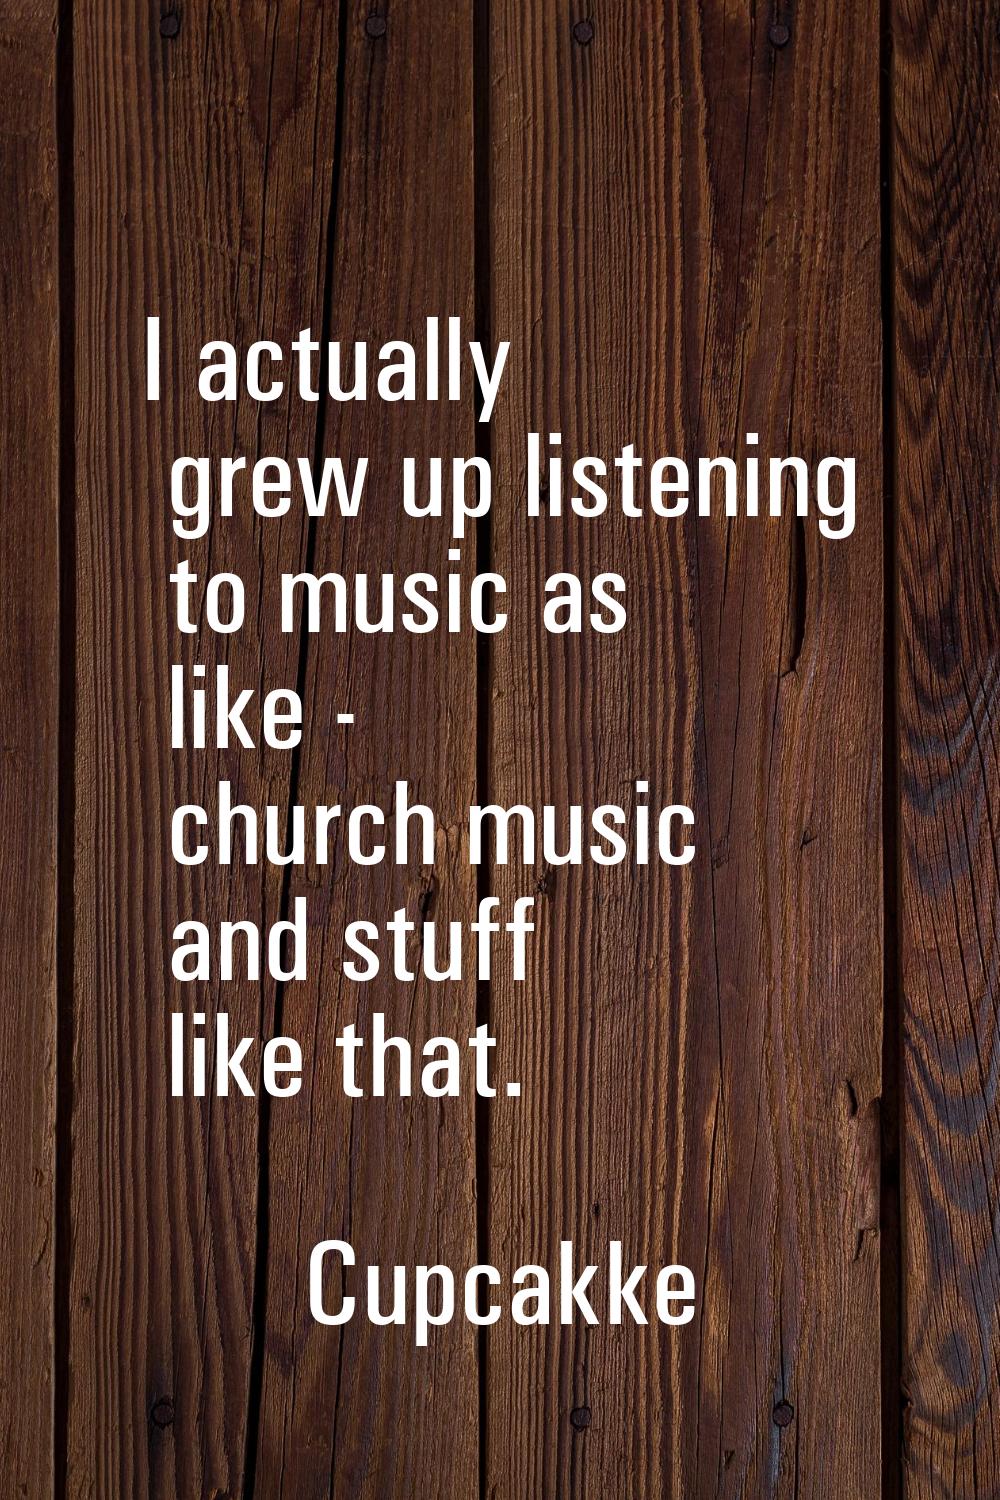 I actually grew up listening to music as like - church music and stuff like that.